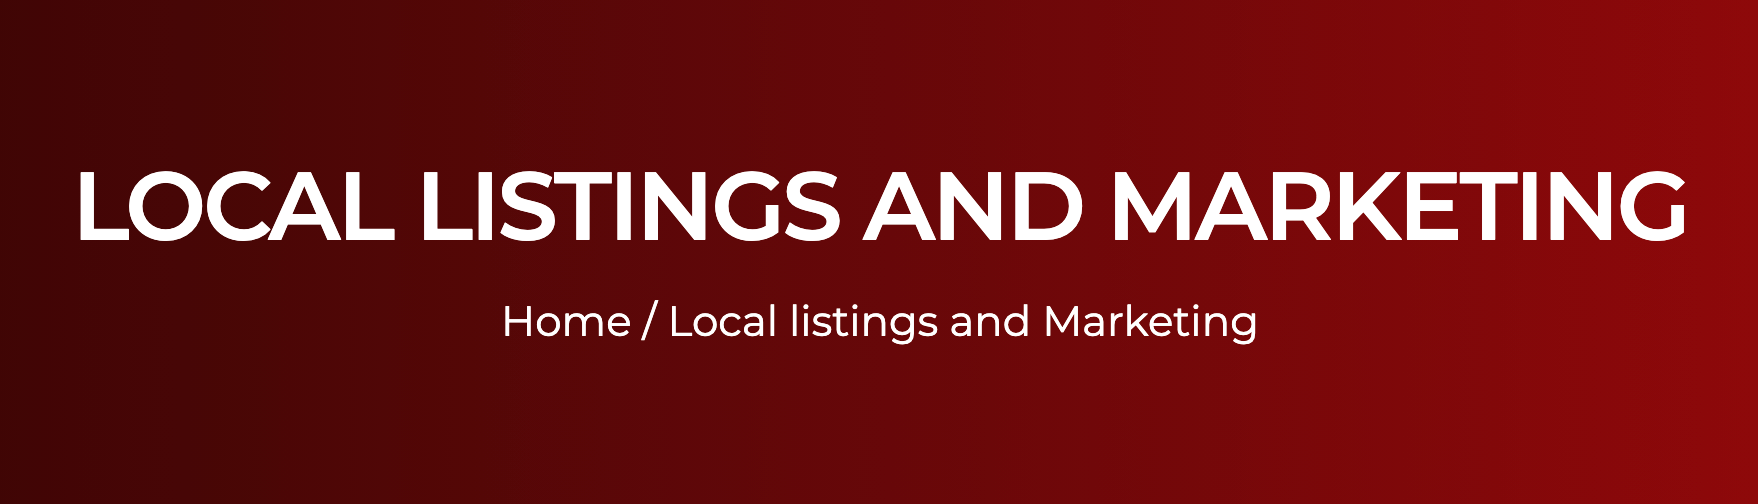 Local Listings and Marketing banner